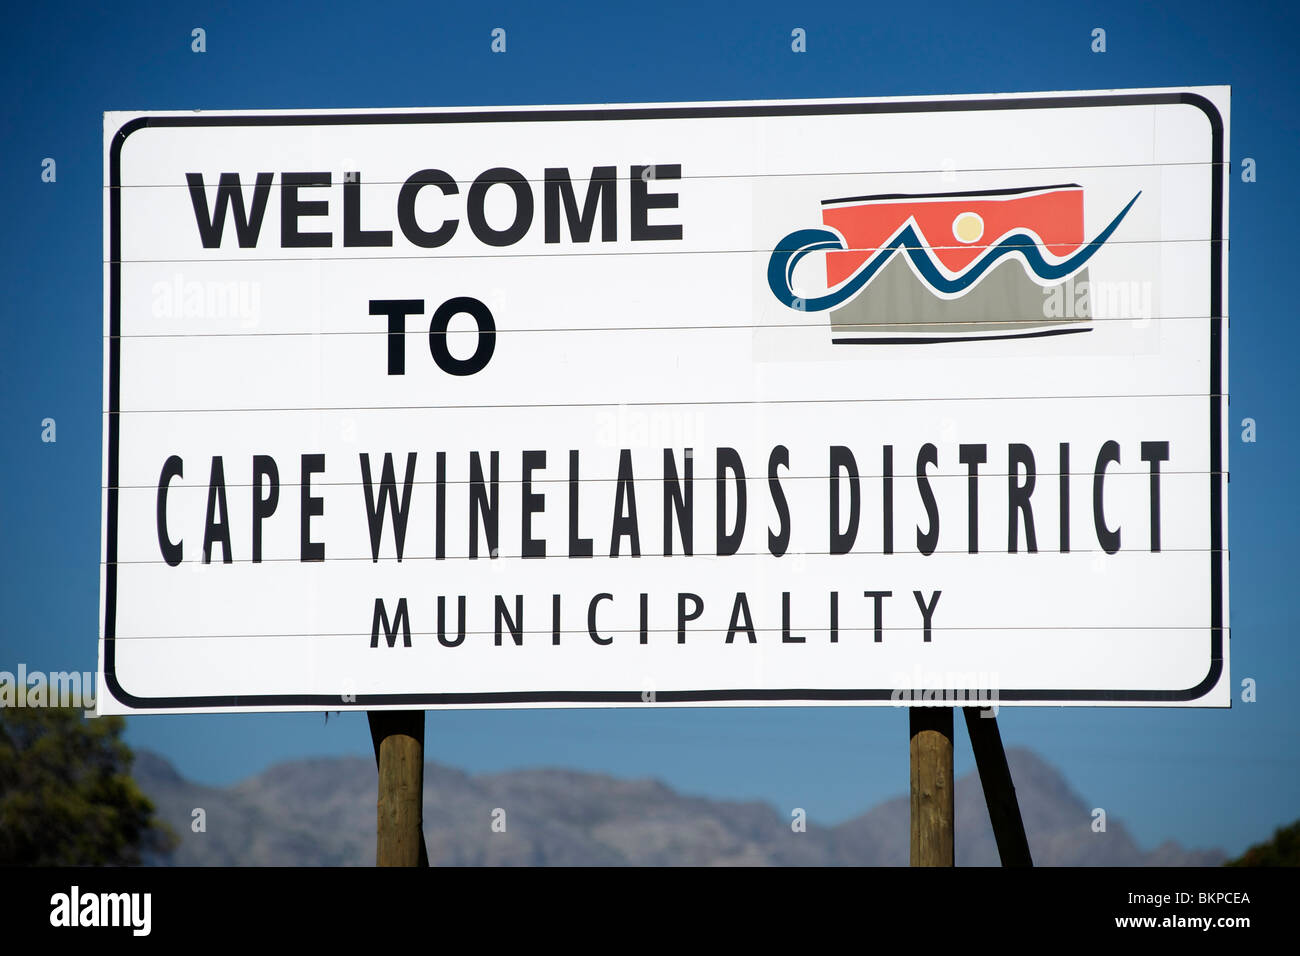 Welcome to Cape Winelands District Municipality sign, Western Cape Province, South Africa. Stock Photo